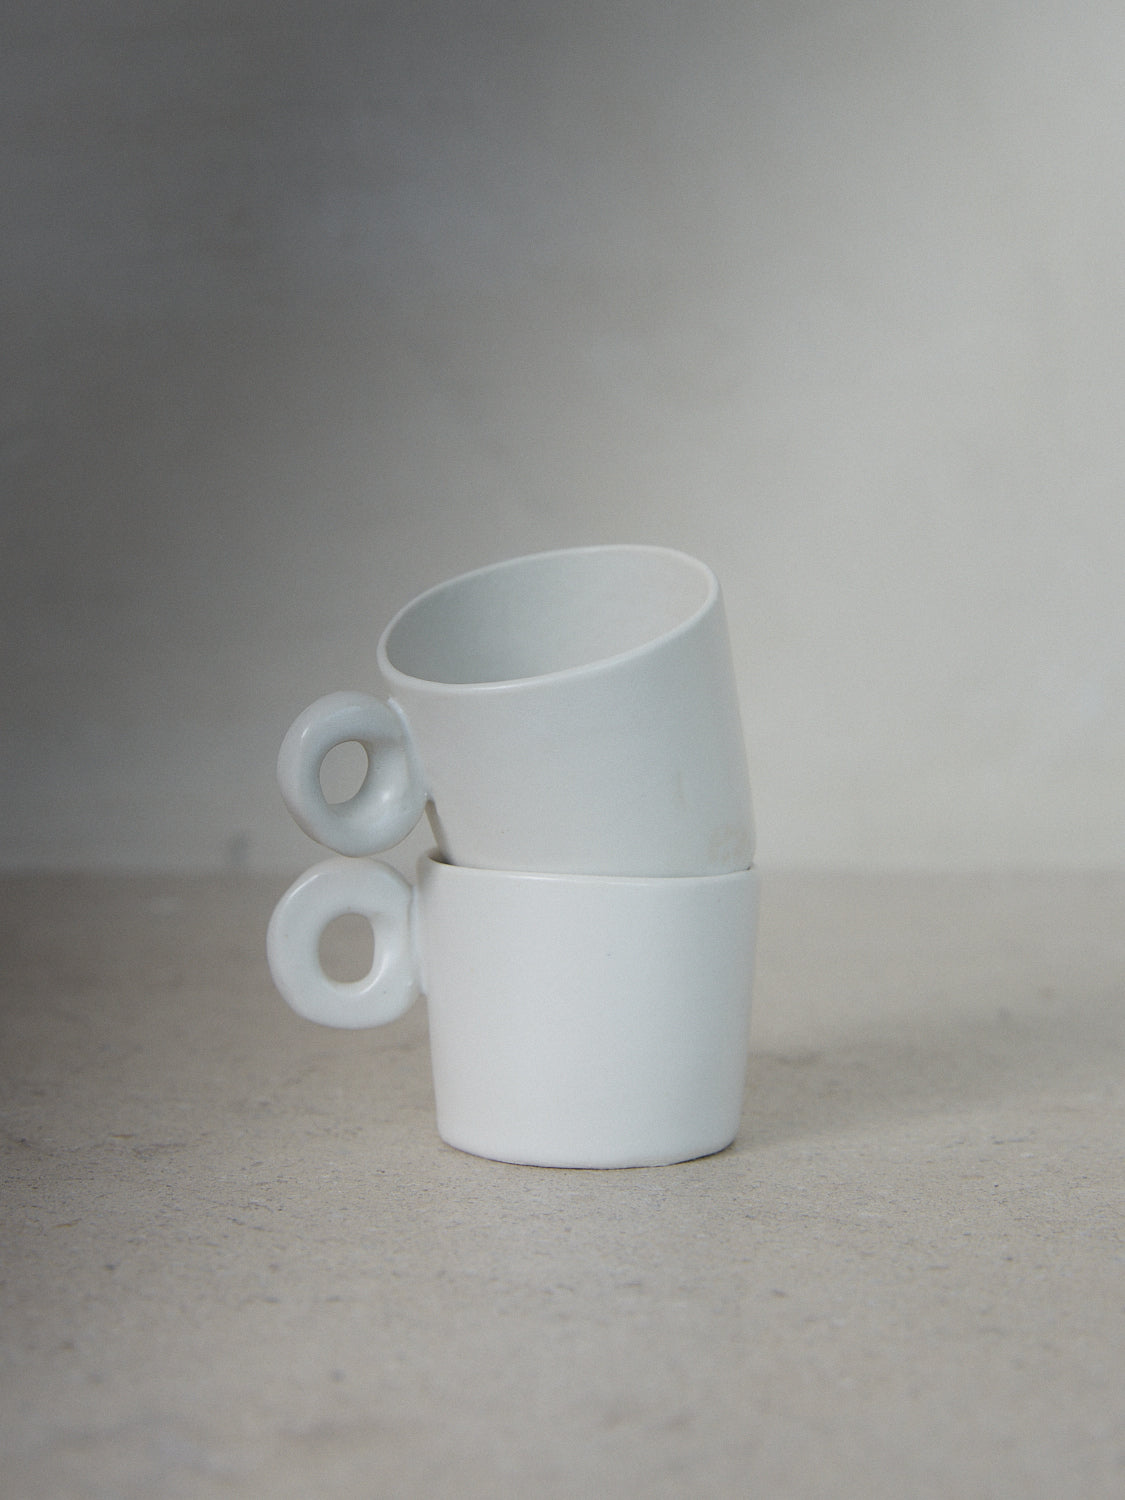 Raw Espresso Cup Set. Exclusively ours. A set of two playful, handmade espresso cups with round handles and matching saucers in matte white stoneware. 